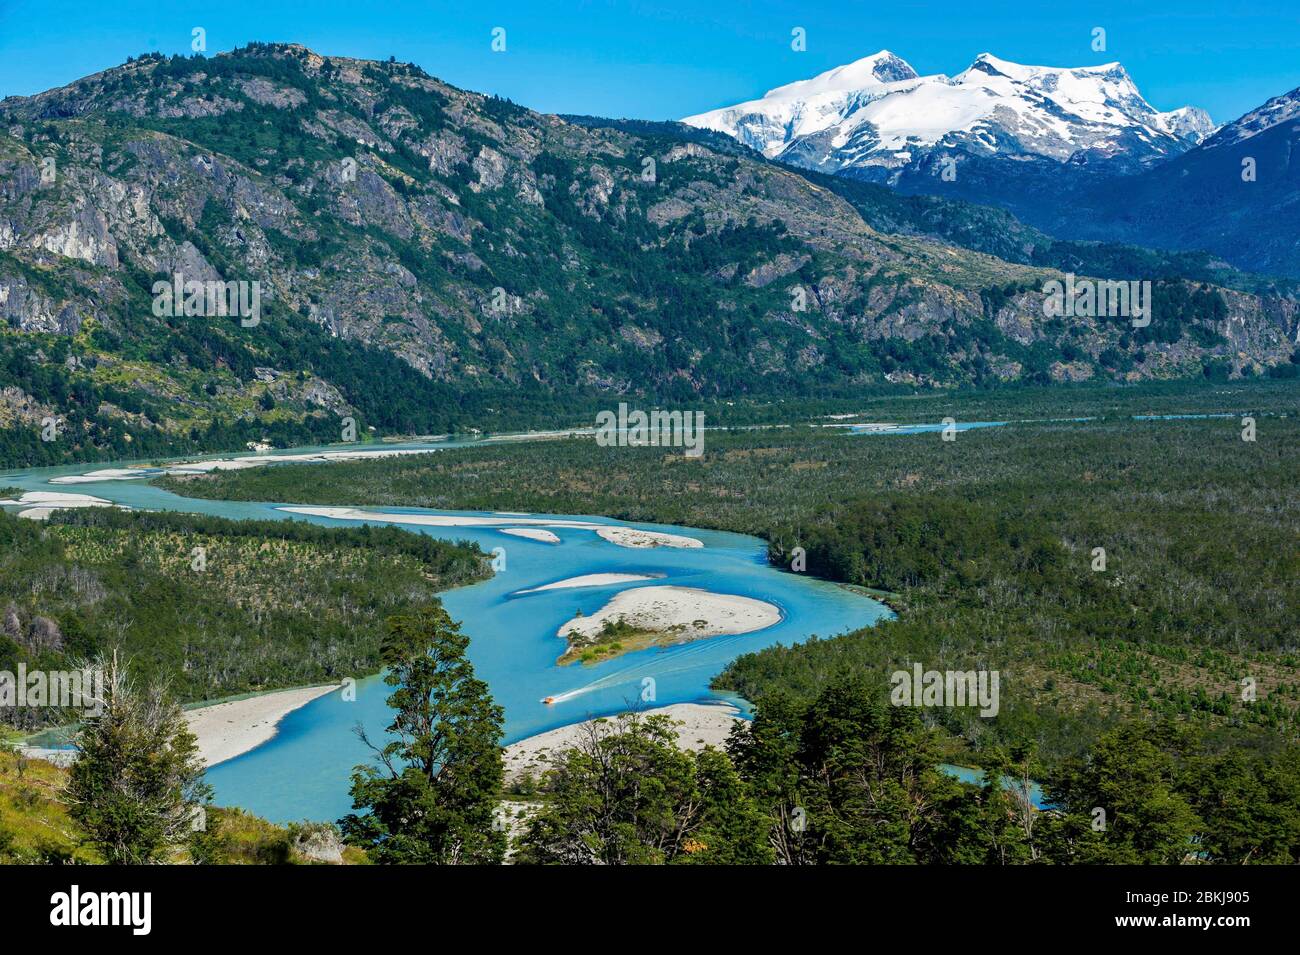 Chile, Patagonia, Aysen, Coyhaique, jetboat on the rio Leon, under the glaciers that come from the Patagonian Ice Fields North Stock Photo